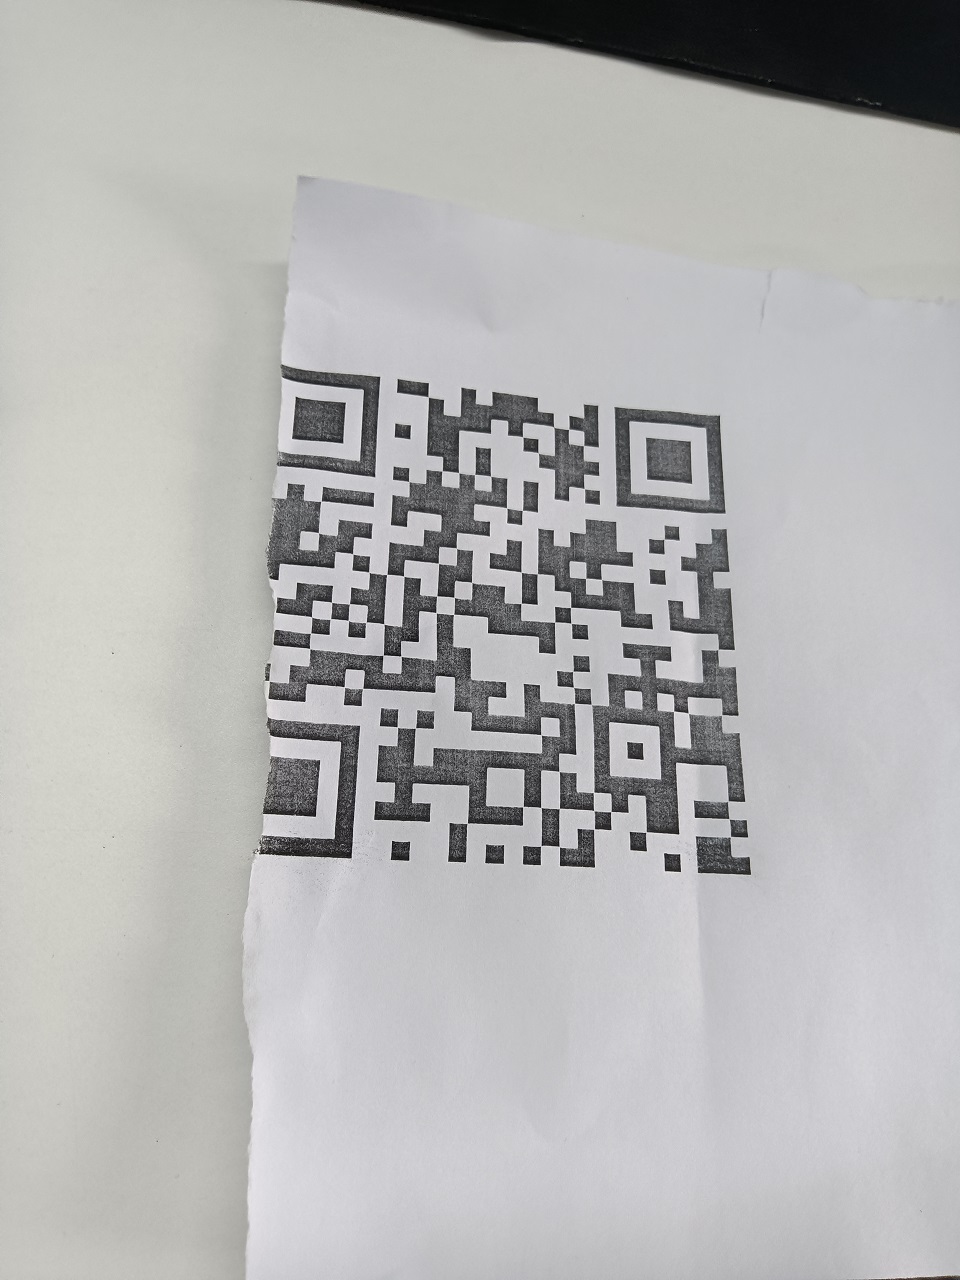 damaged qr code with missing side